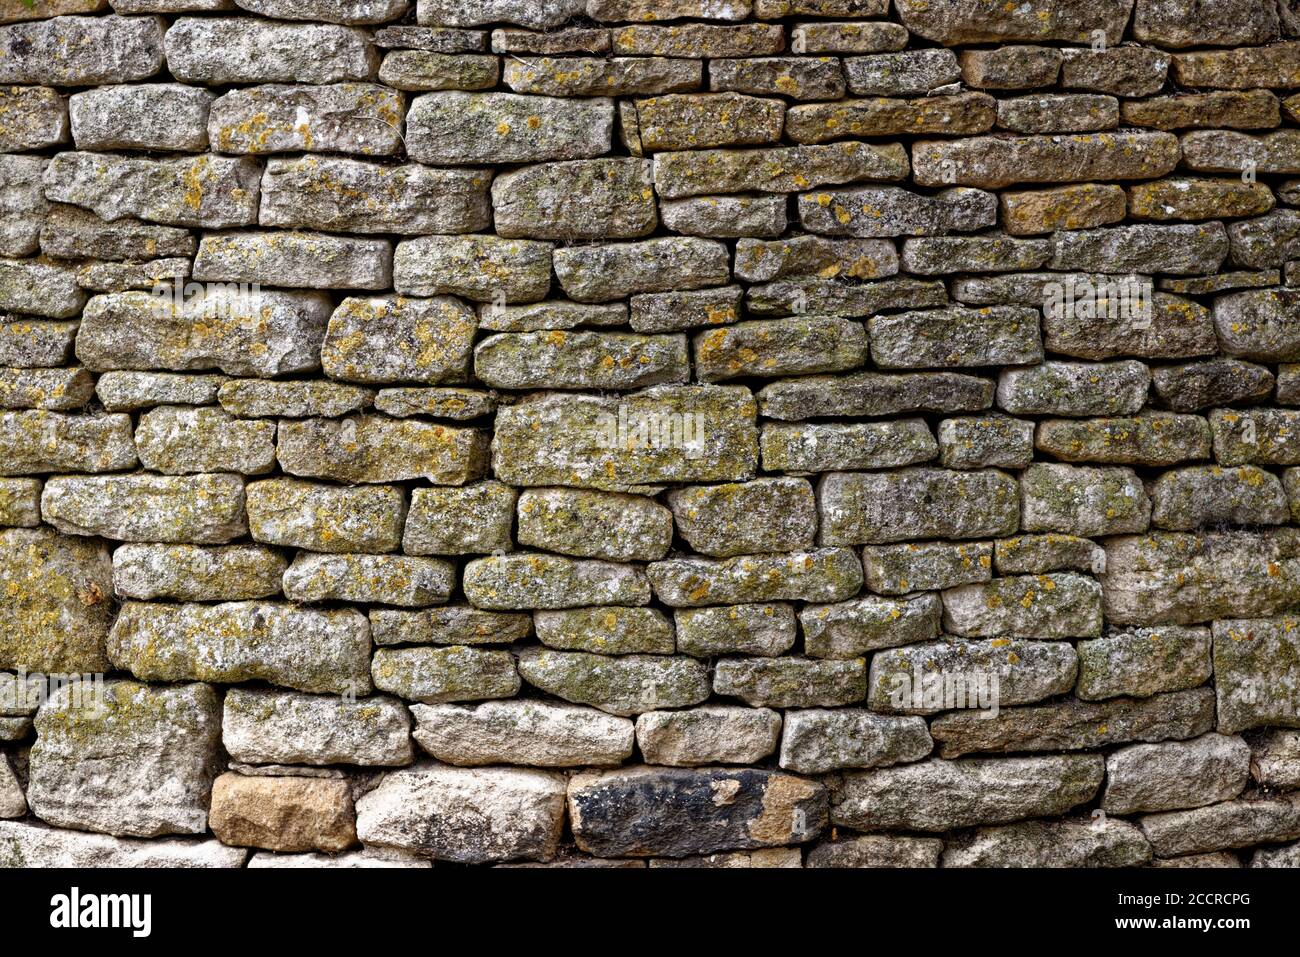 Background - A dry stone wall built with Cotswold stone at Burford in the  Cotswolds, Oxfordshire, United Kingdom Stock Photo - Alamy